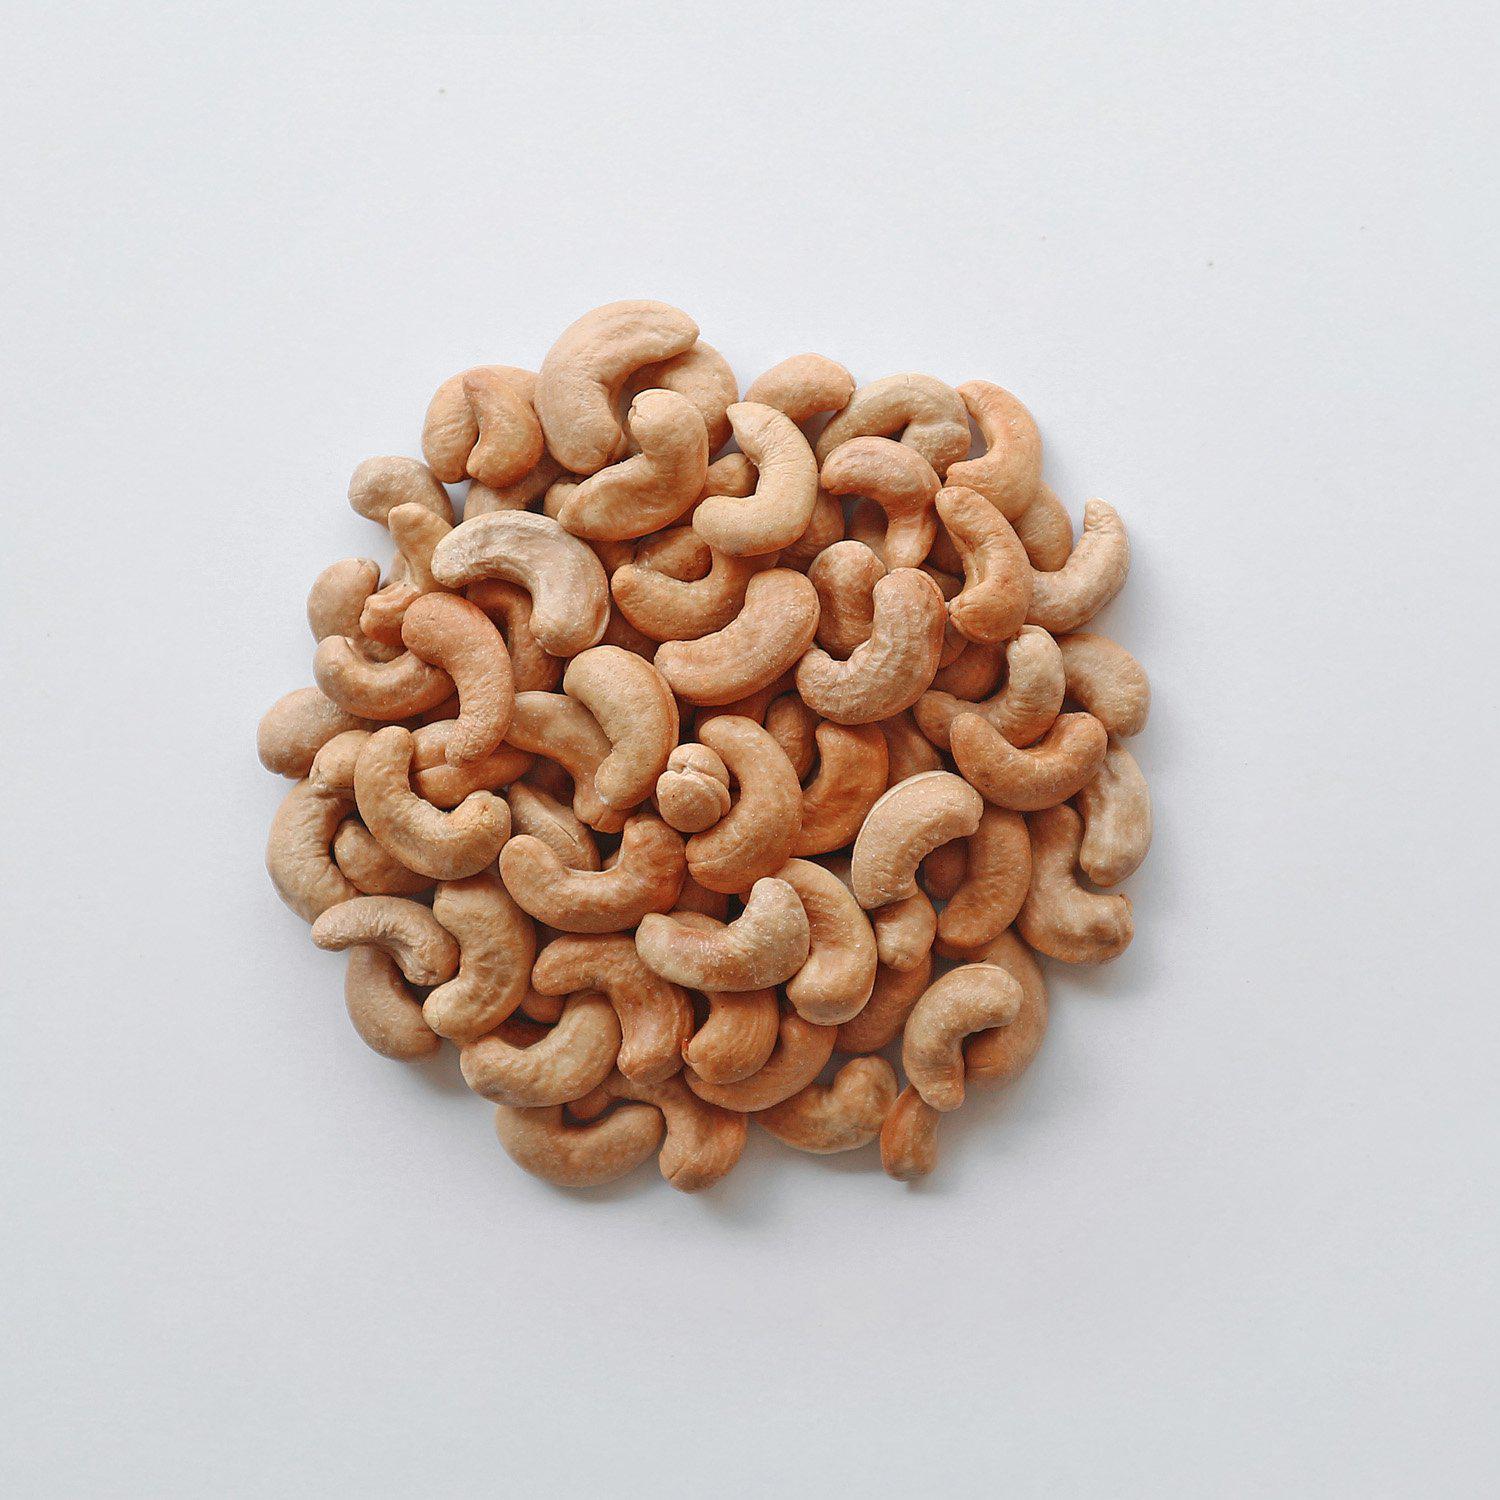 UNSALTED CASHEWS-Roasted Nuts-The Roasted Nut Inc.